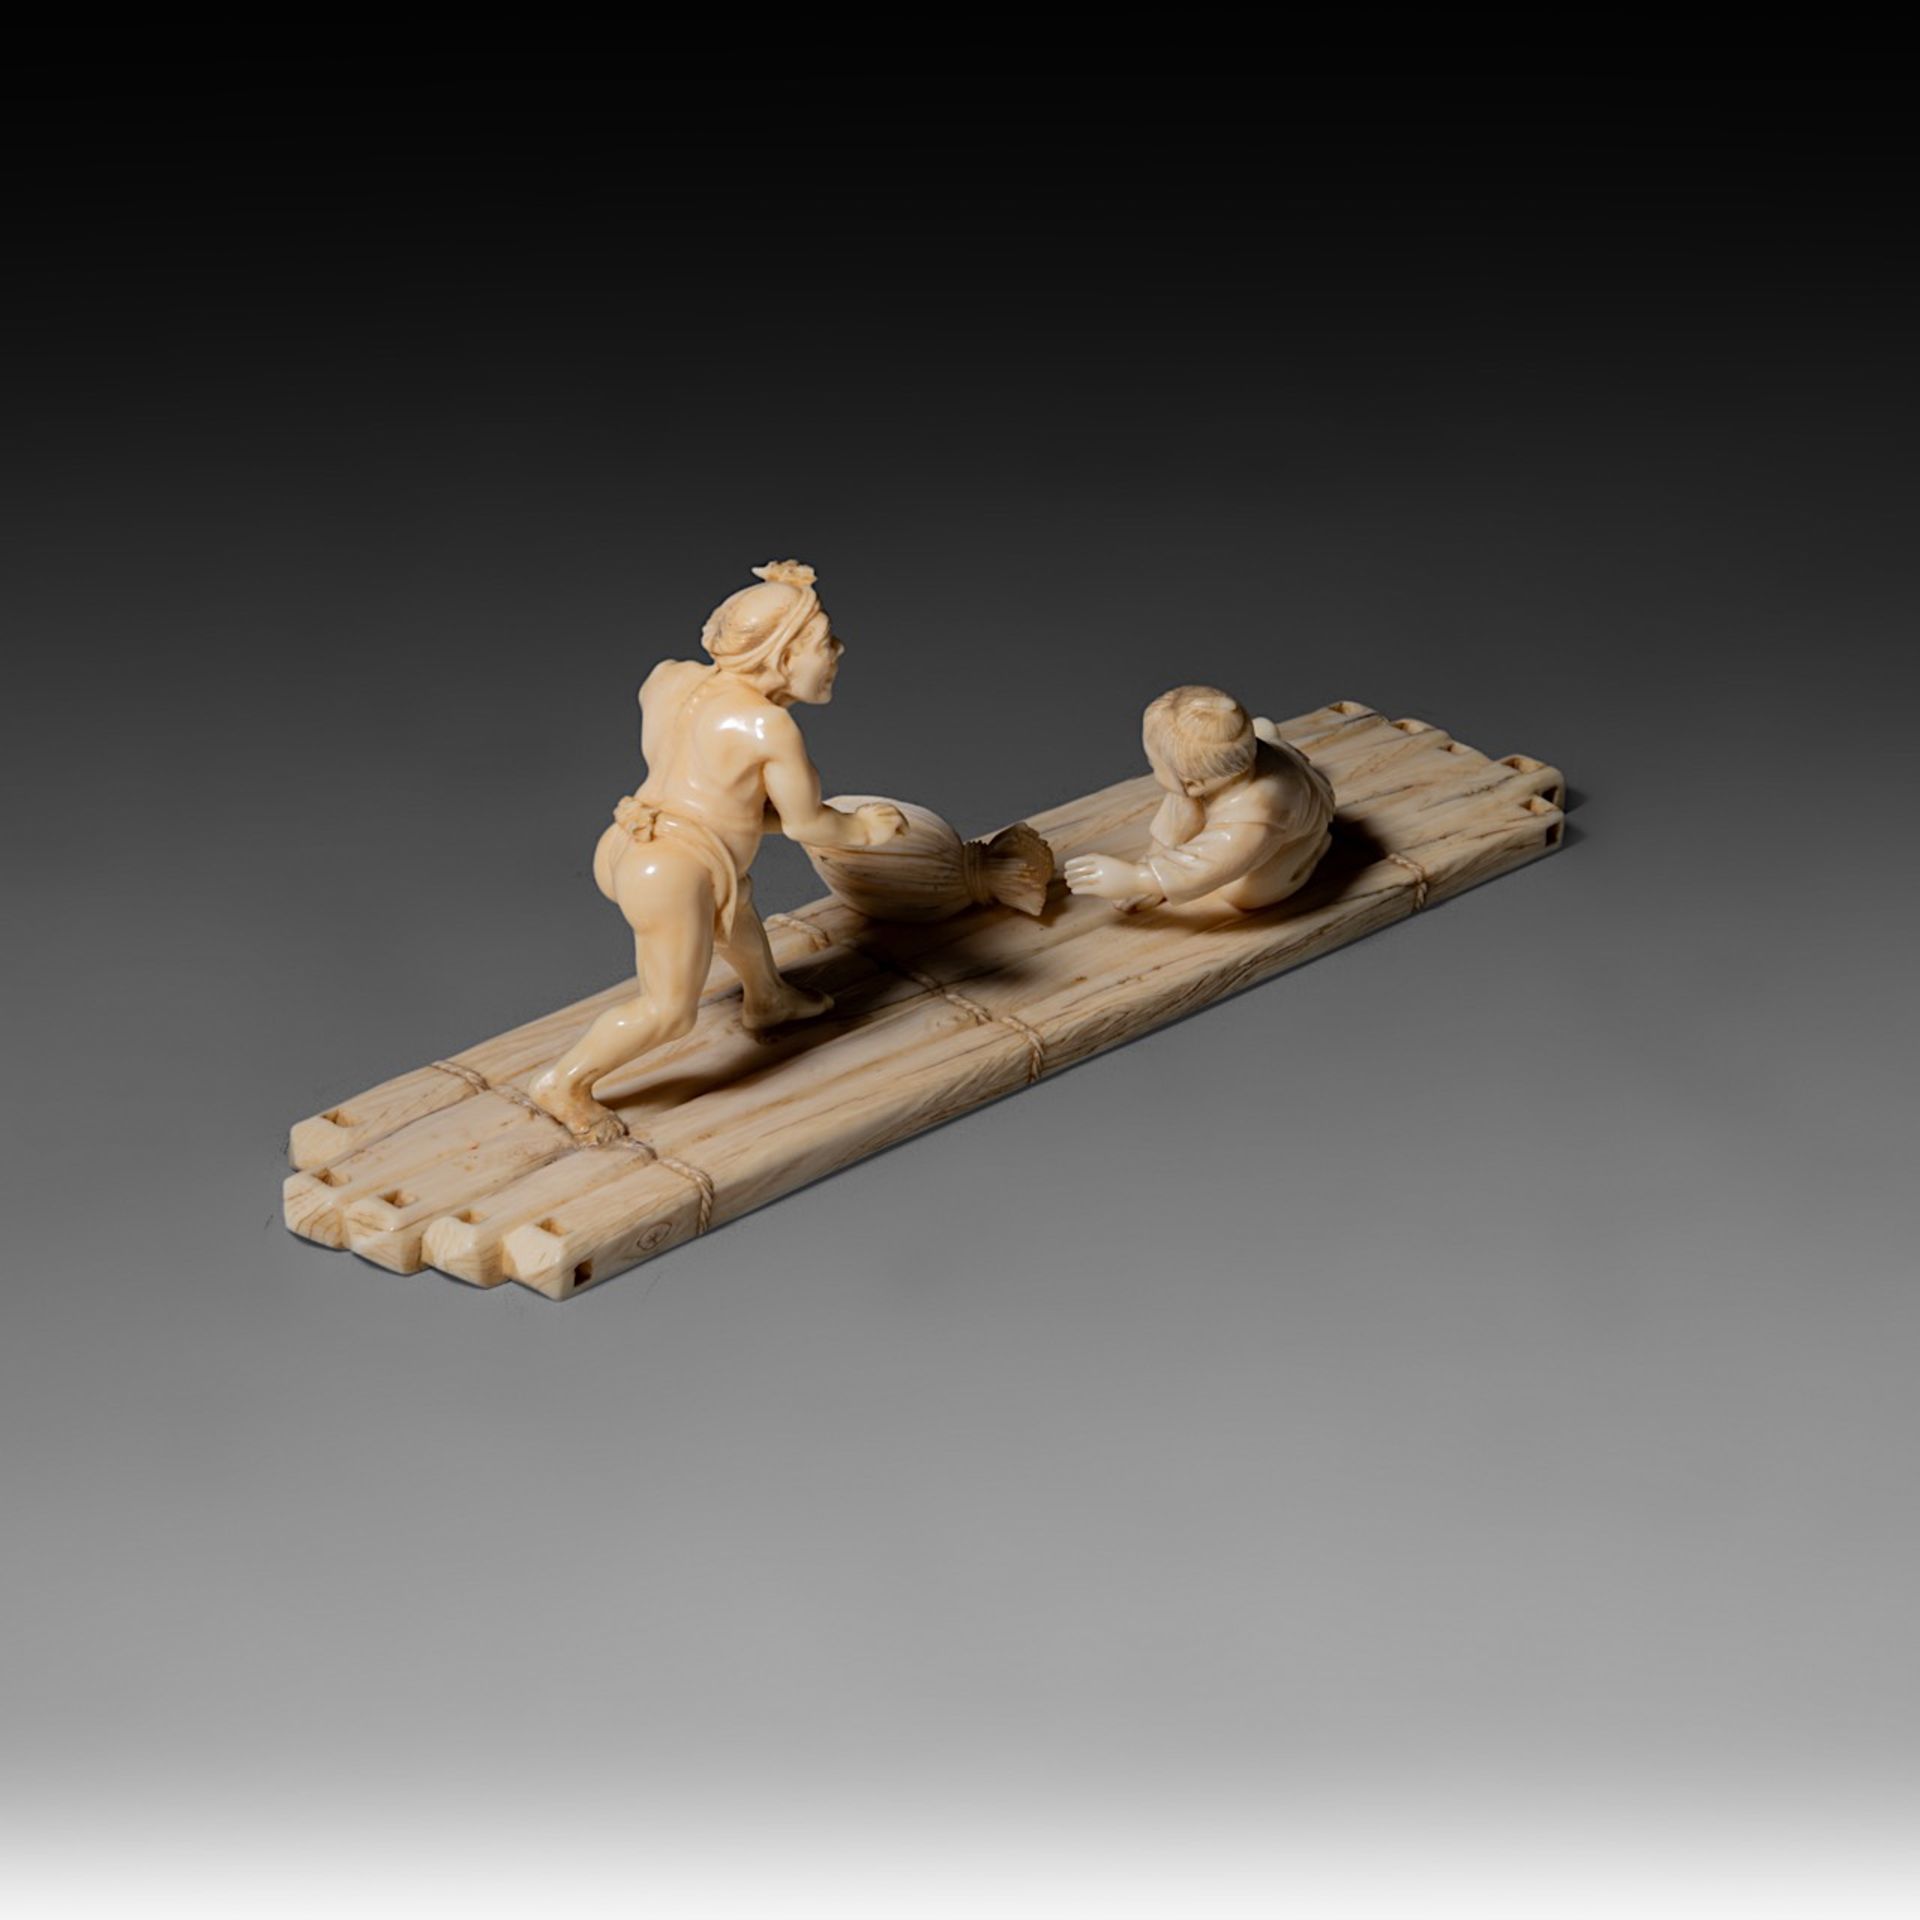 Two Japanese Meiji-period (1868-1912) ivory okimono; one depicts a man rowing a raft while a child s - Image 7 of 19